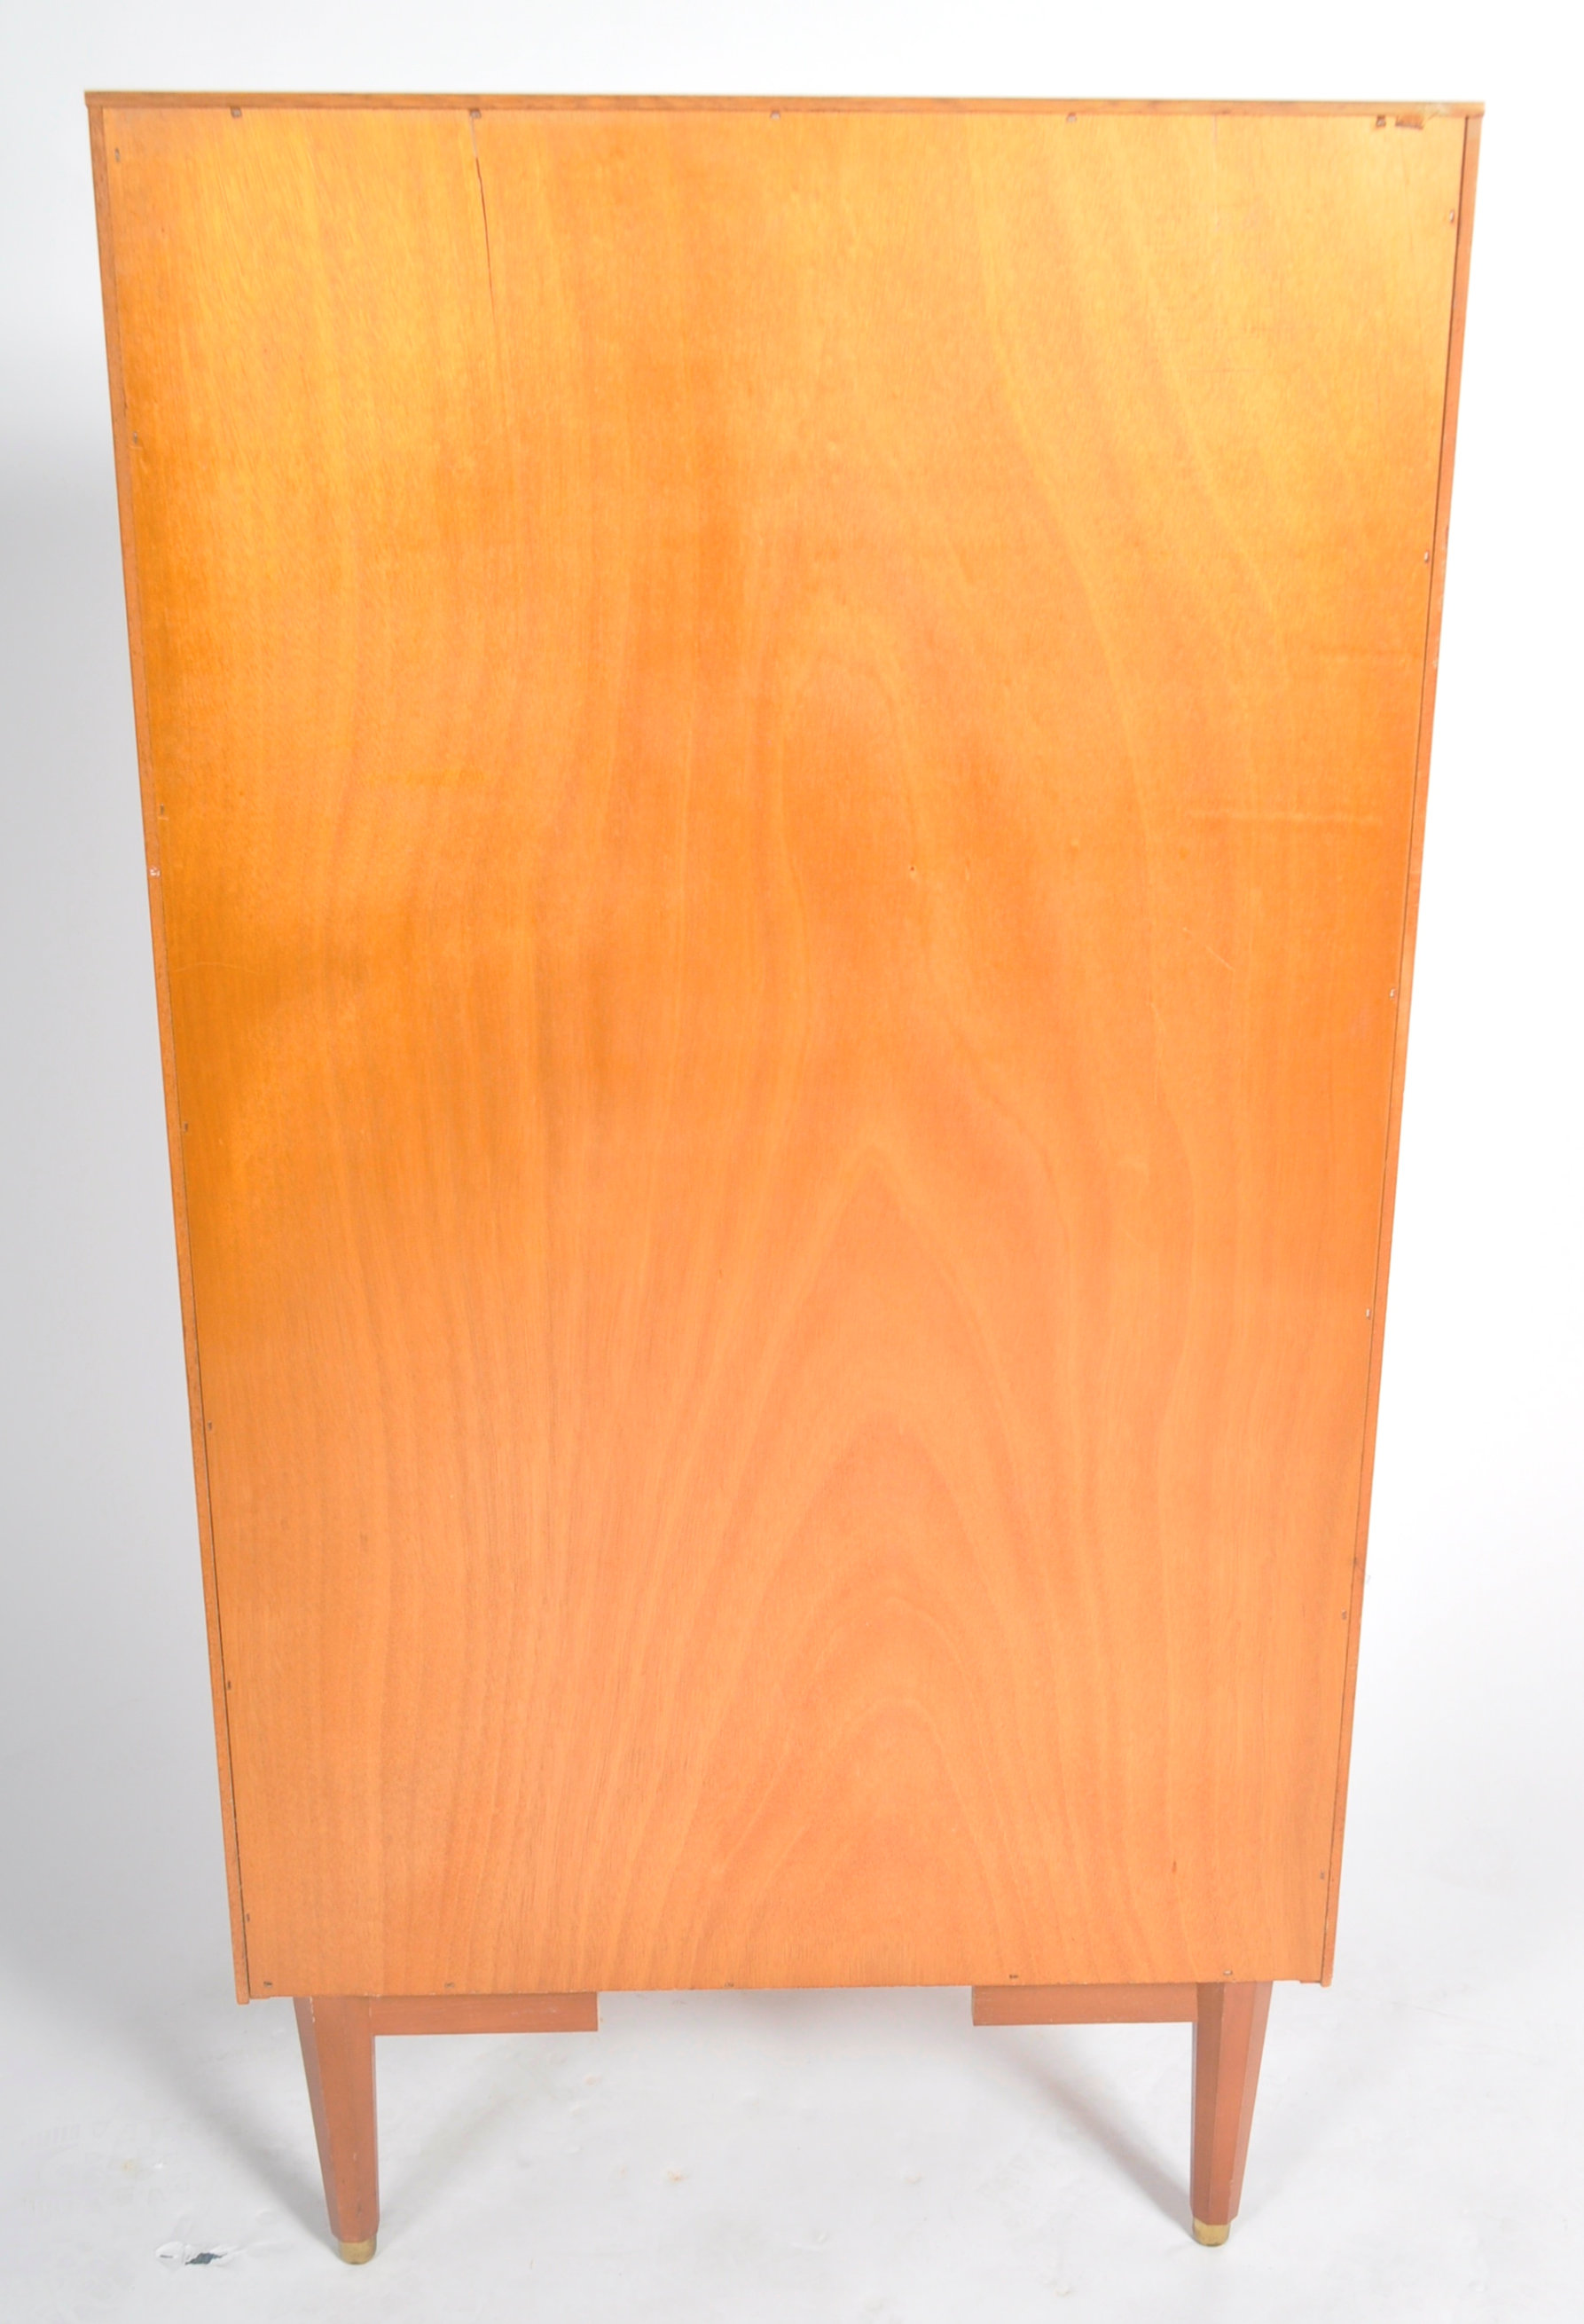 RICHARD YOUNG FOR G PLAN - MID CENTURY TEAK CHEST OF DRAWERS - Image 8 of 8